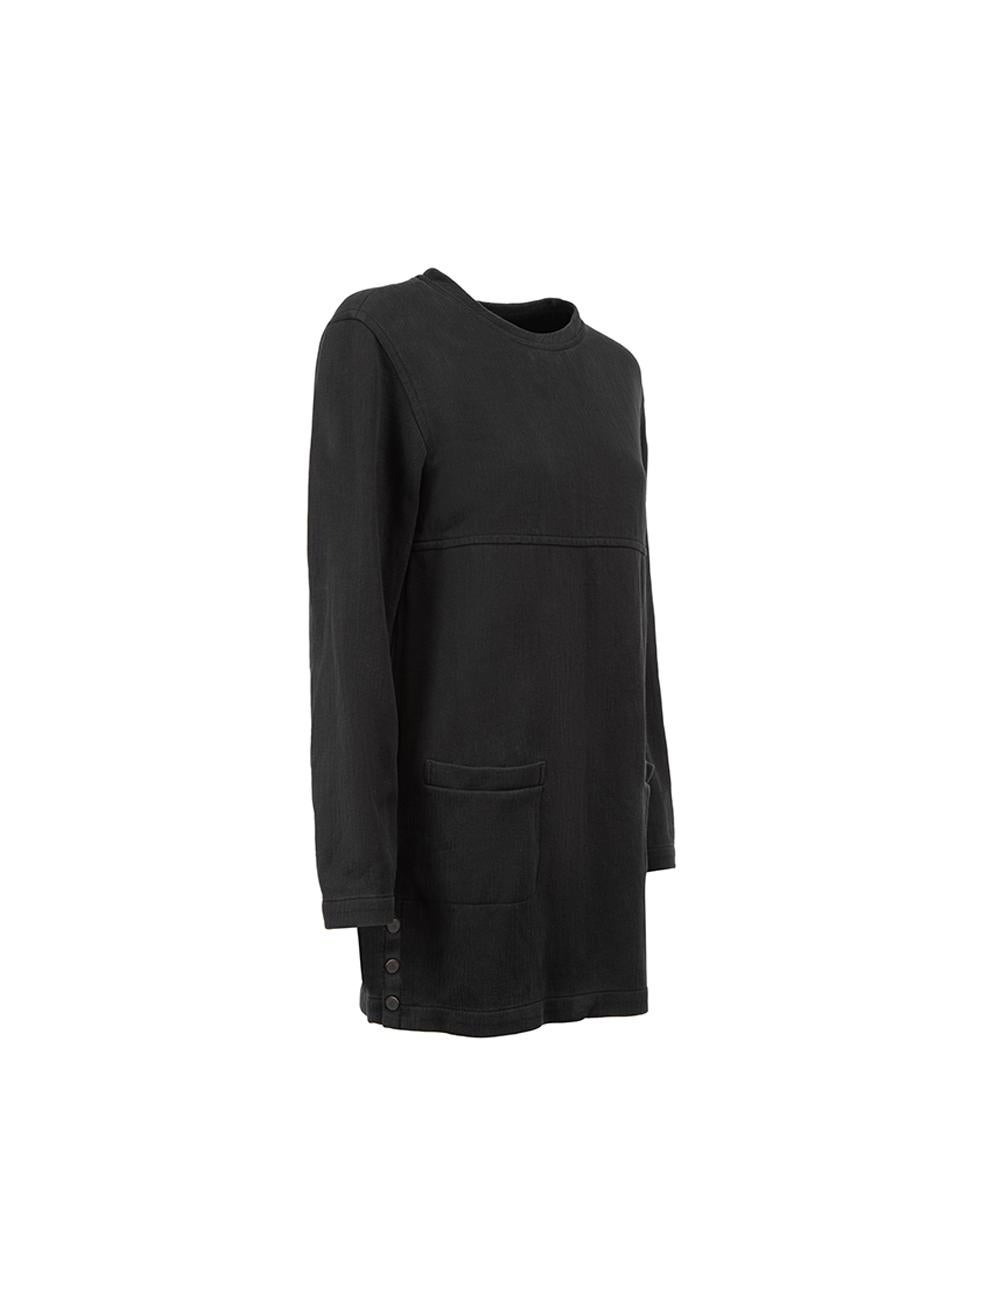 CONDITION is Very good. Hardly any visible wear to jumper is evident on this used Proenza Schouler designer resale item. 



Details




Black 

Cotton

Long sleeved oversized sweatshirt

2x Pockets on the front

3x Black snap buttons on each